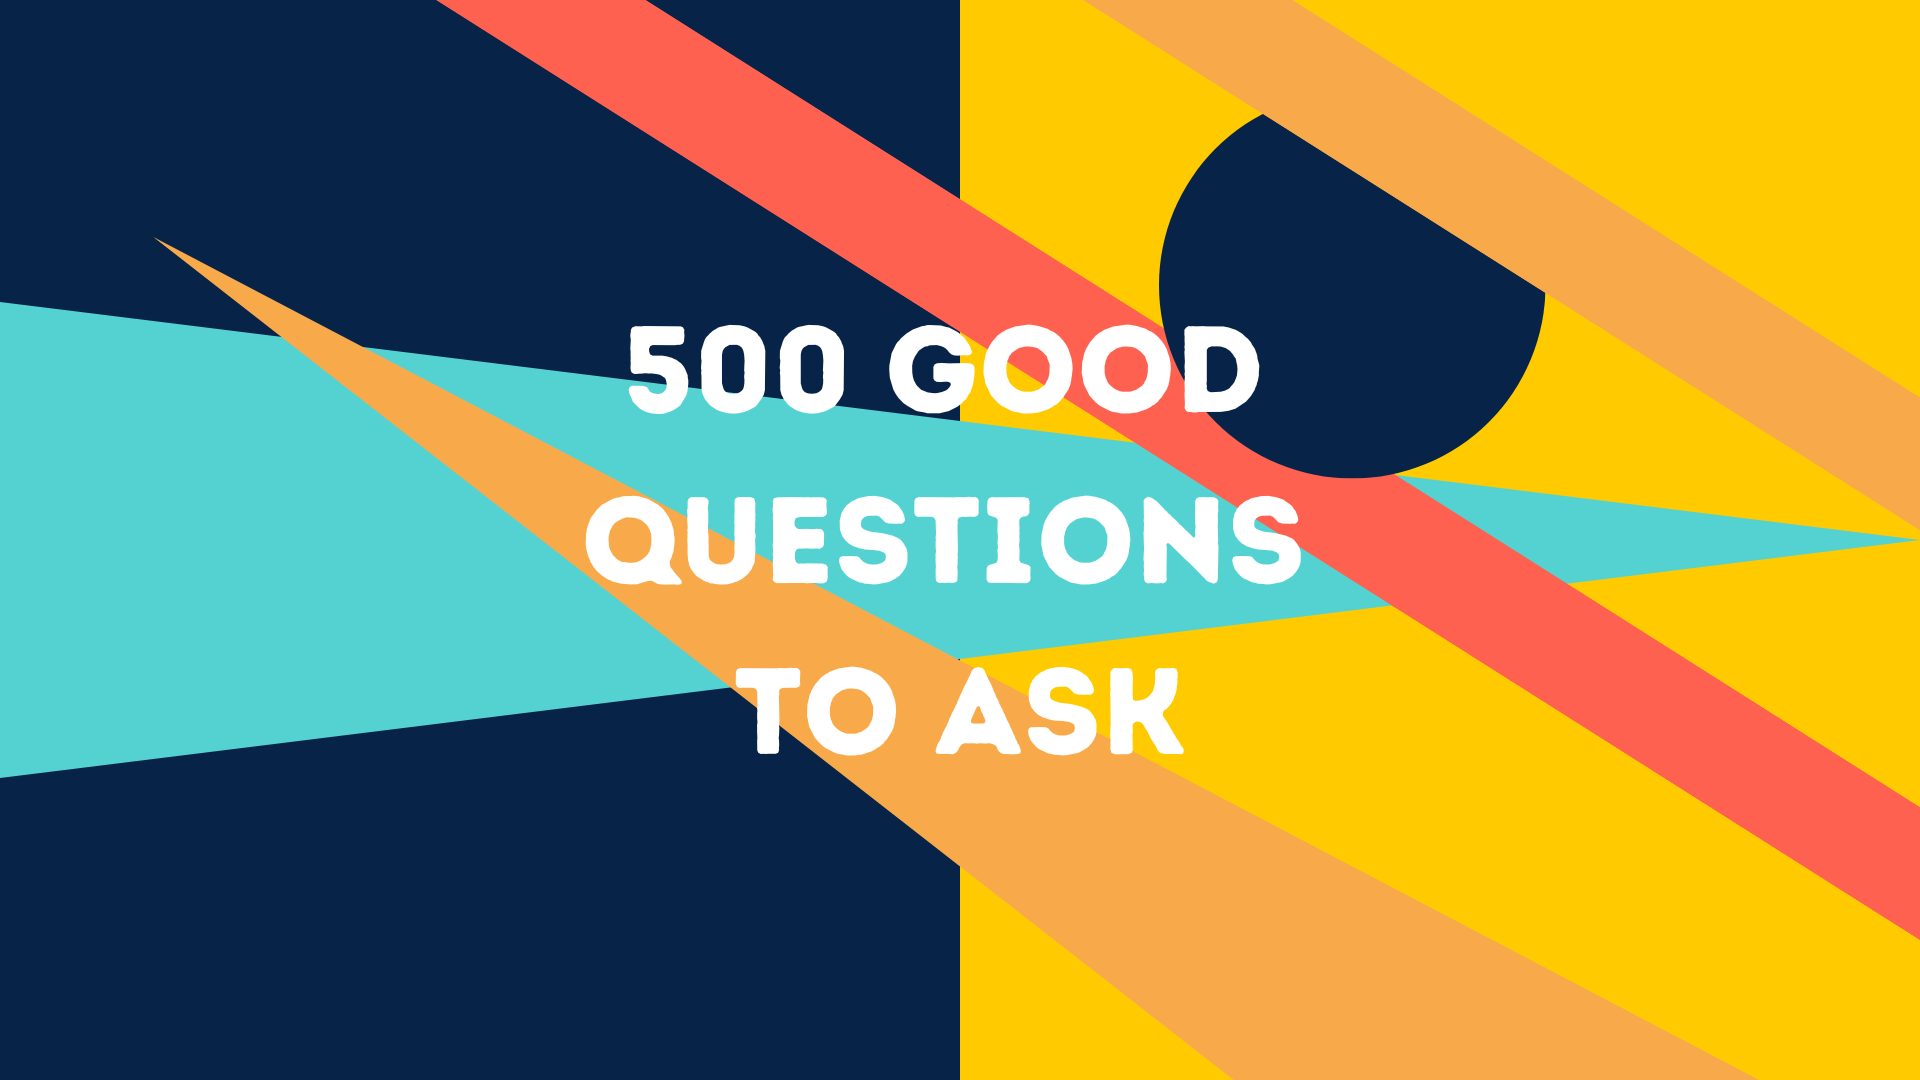 500 Good Questions to Ask